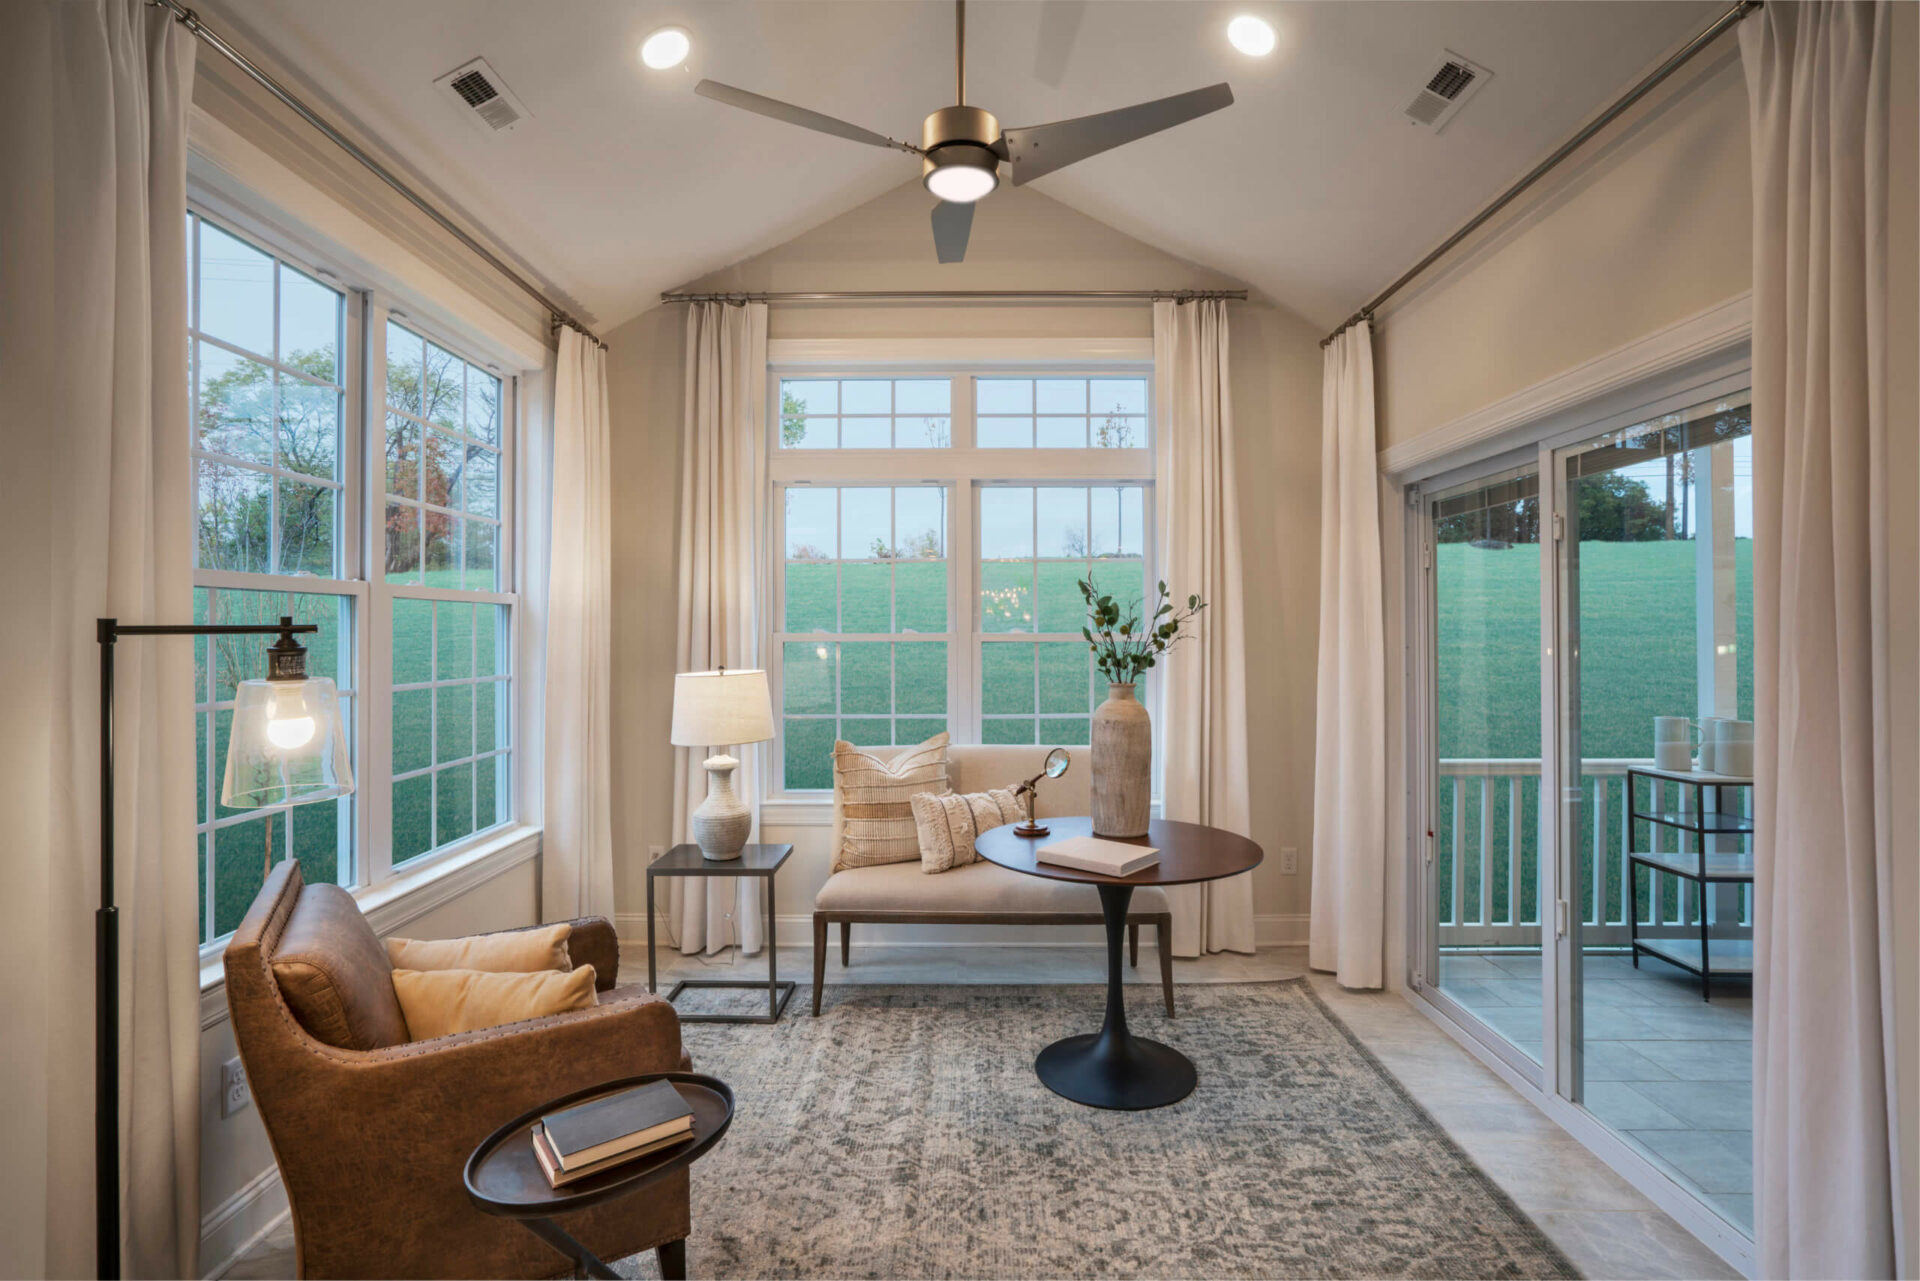 Sun room with ceiling fan from Traditions of America